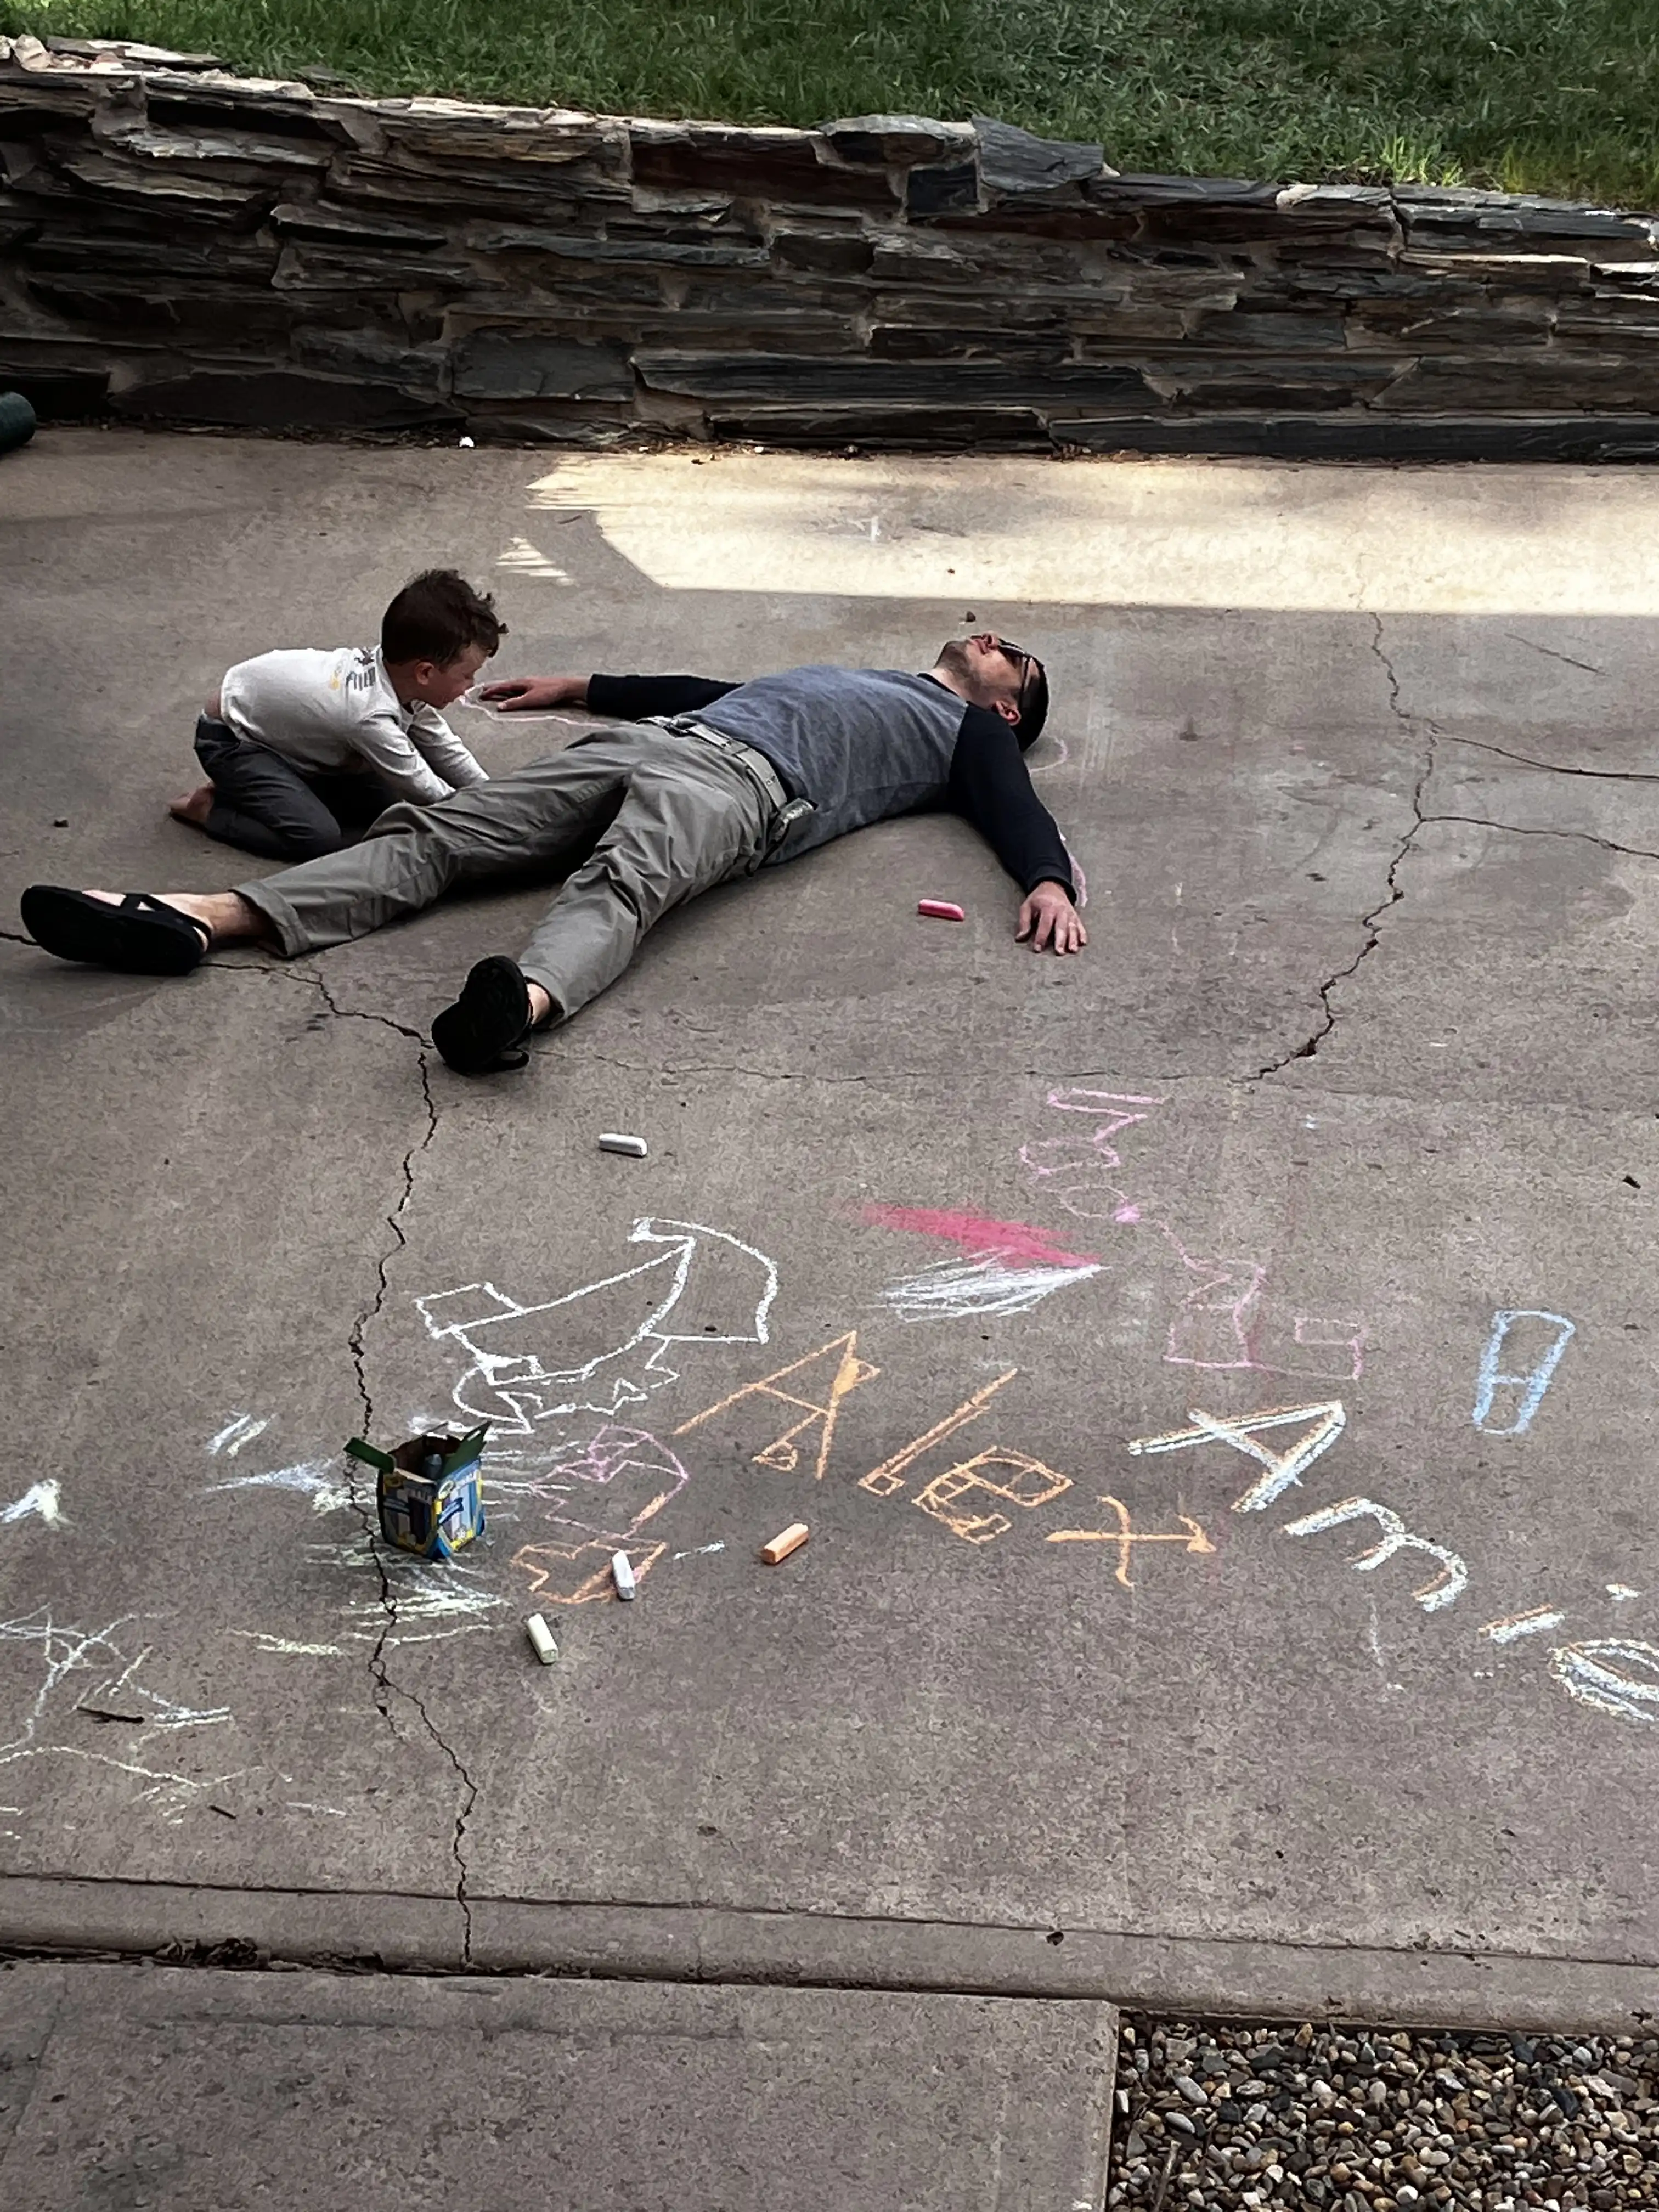 Graham drawing an outline around Alex on the driveway concrete, like a chalk outline of a murder scene.